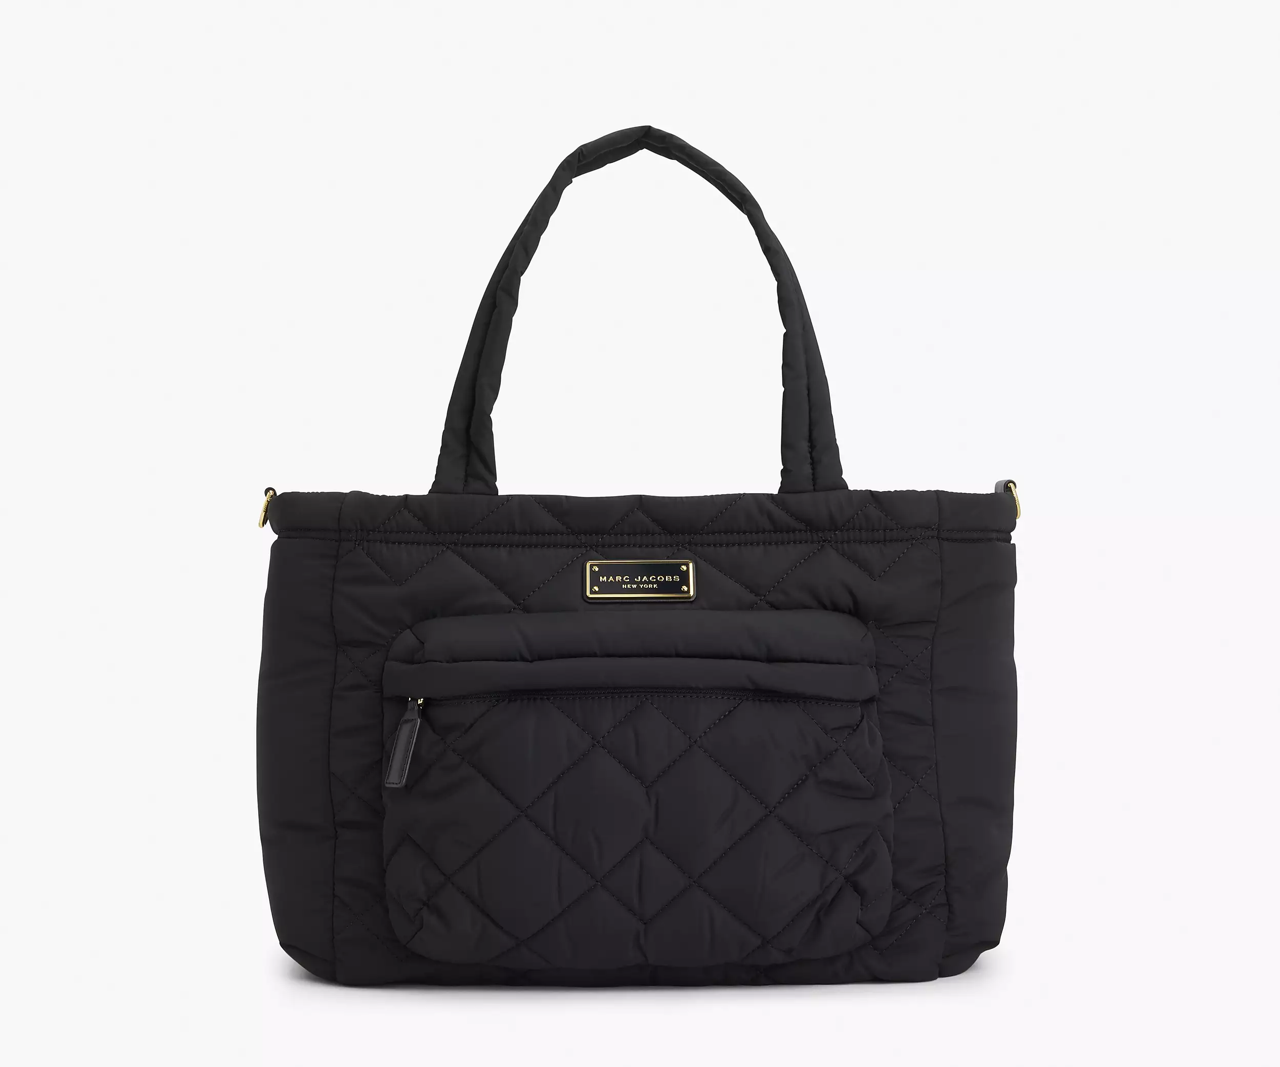 MJ Quilted Nylon Diaper Bag with Changing Pad in Black (M0011380-001)